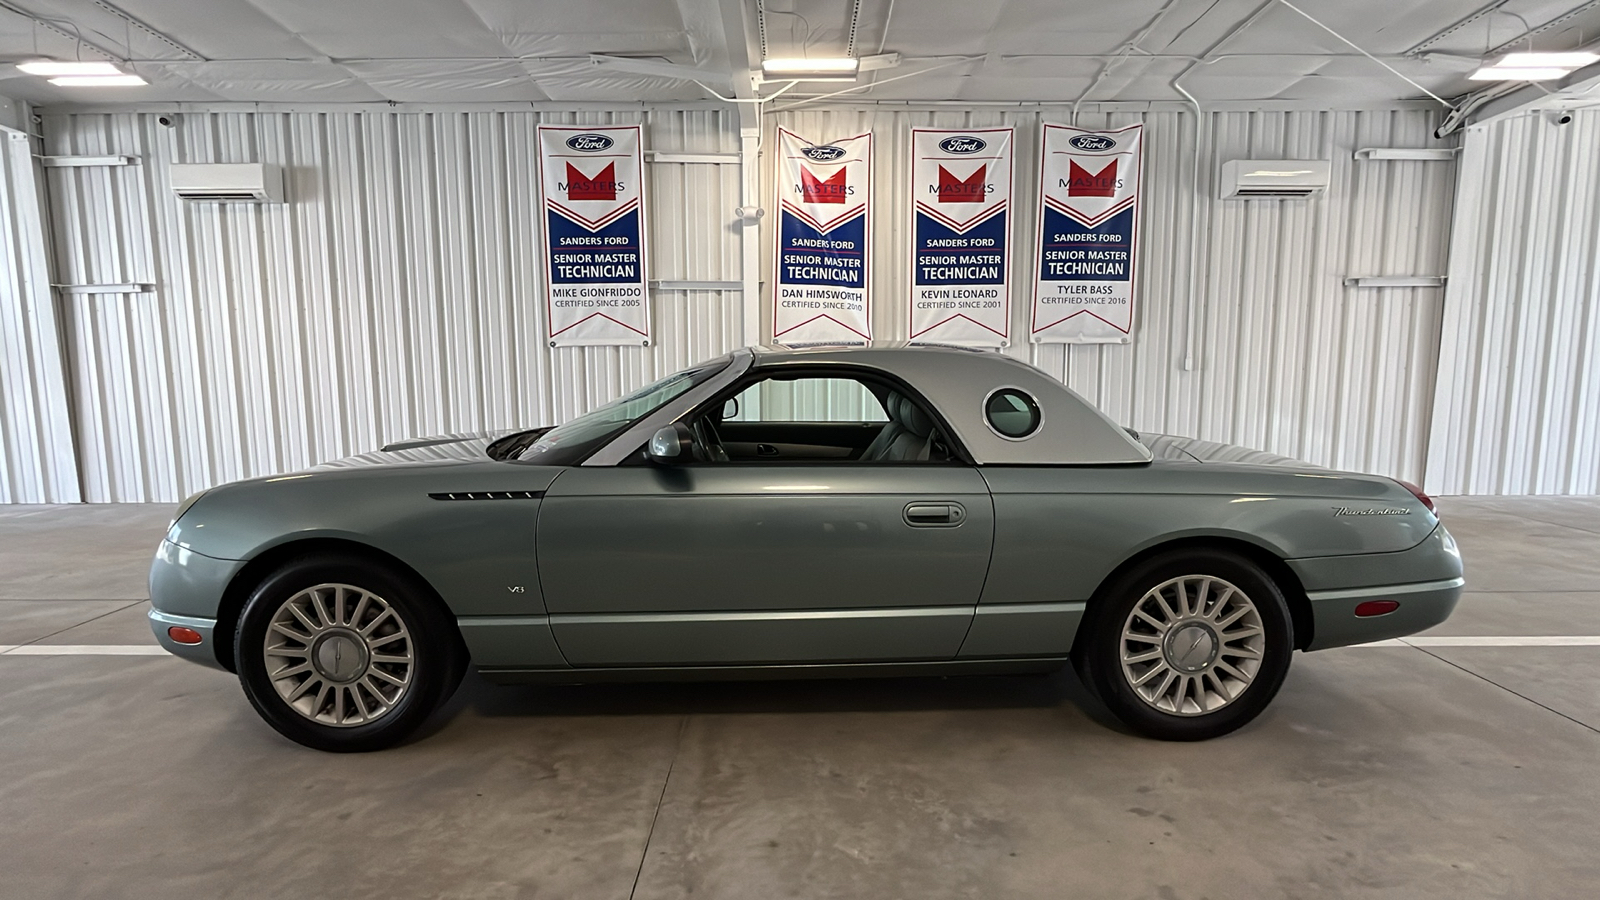 2004 Ford Thunderbird Pacific Coast Roadster 4